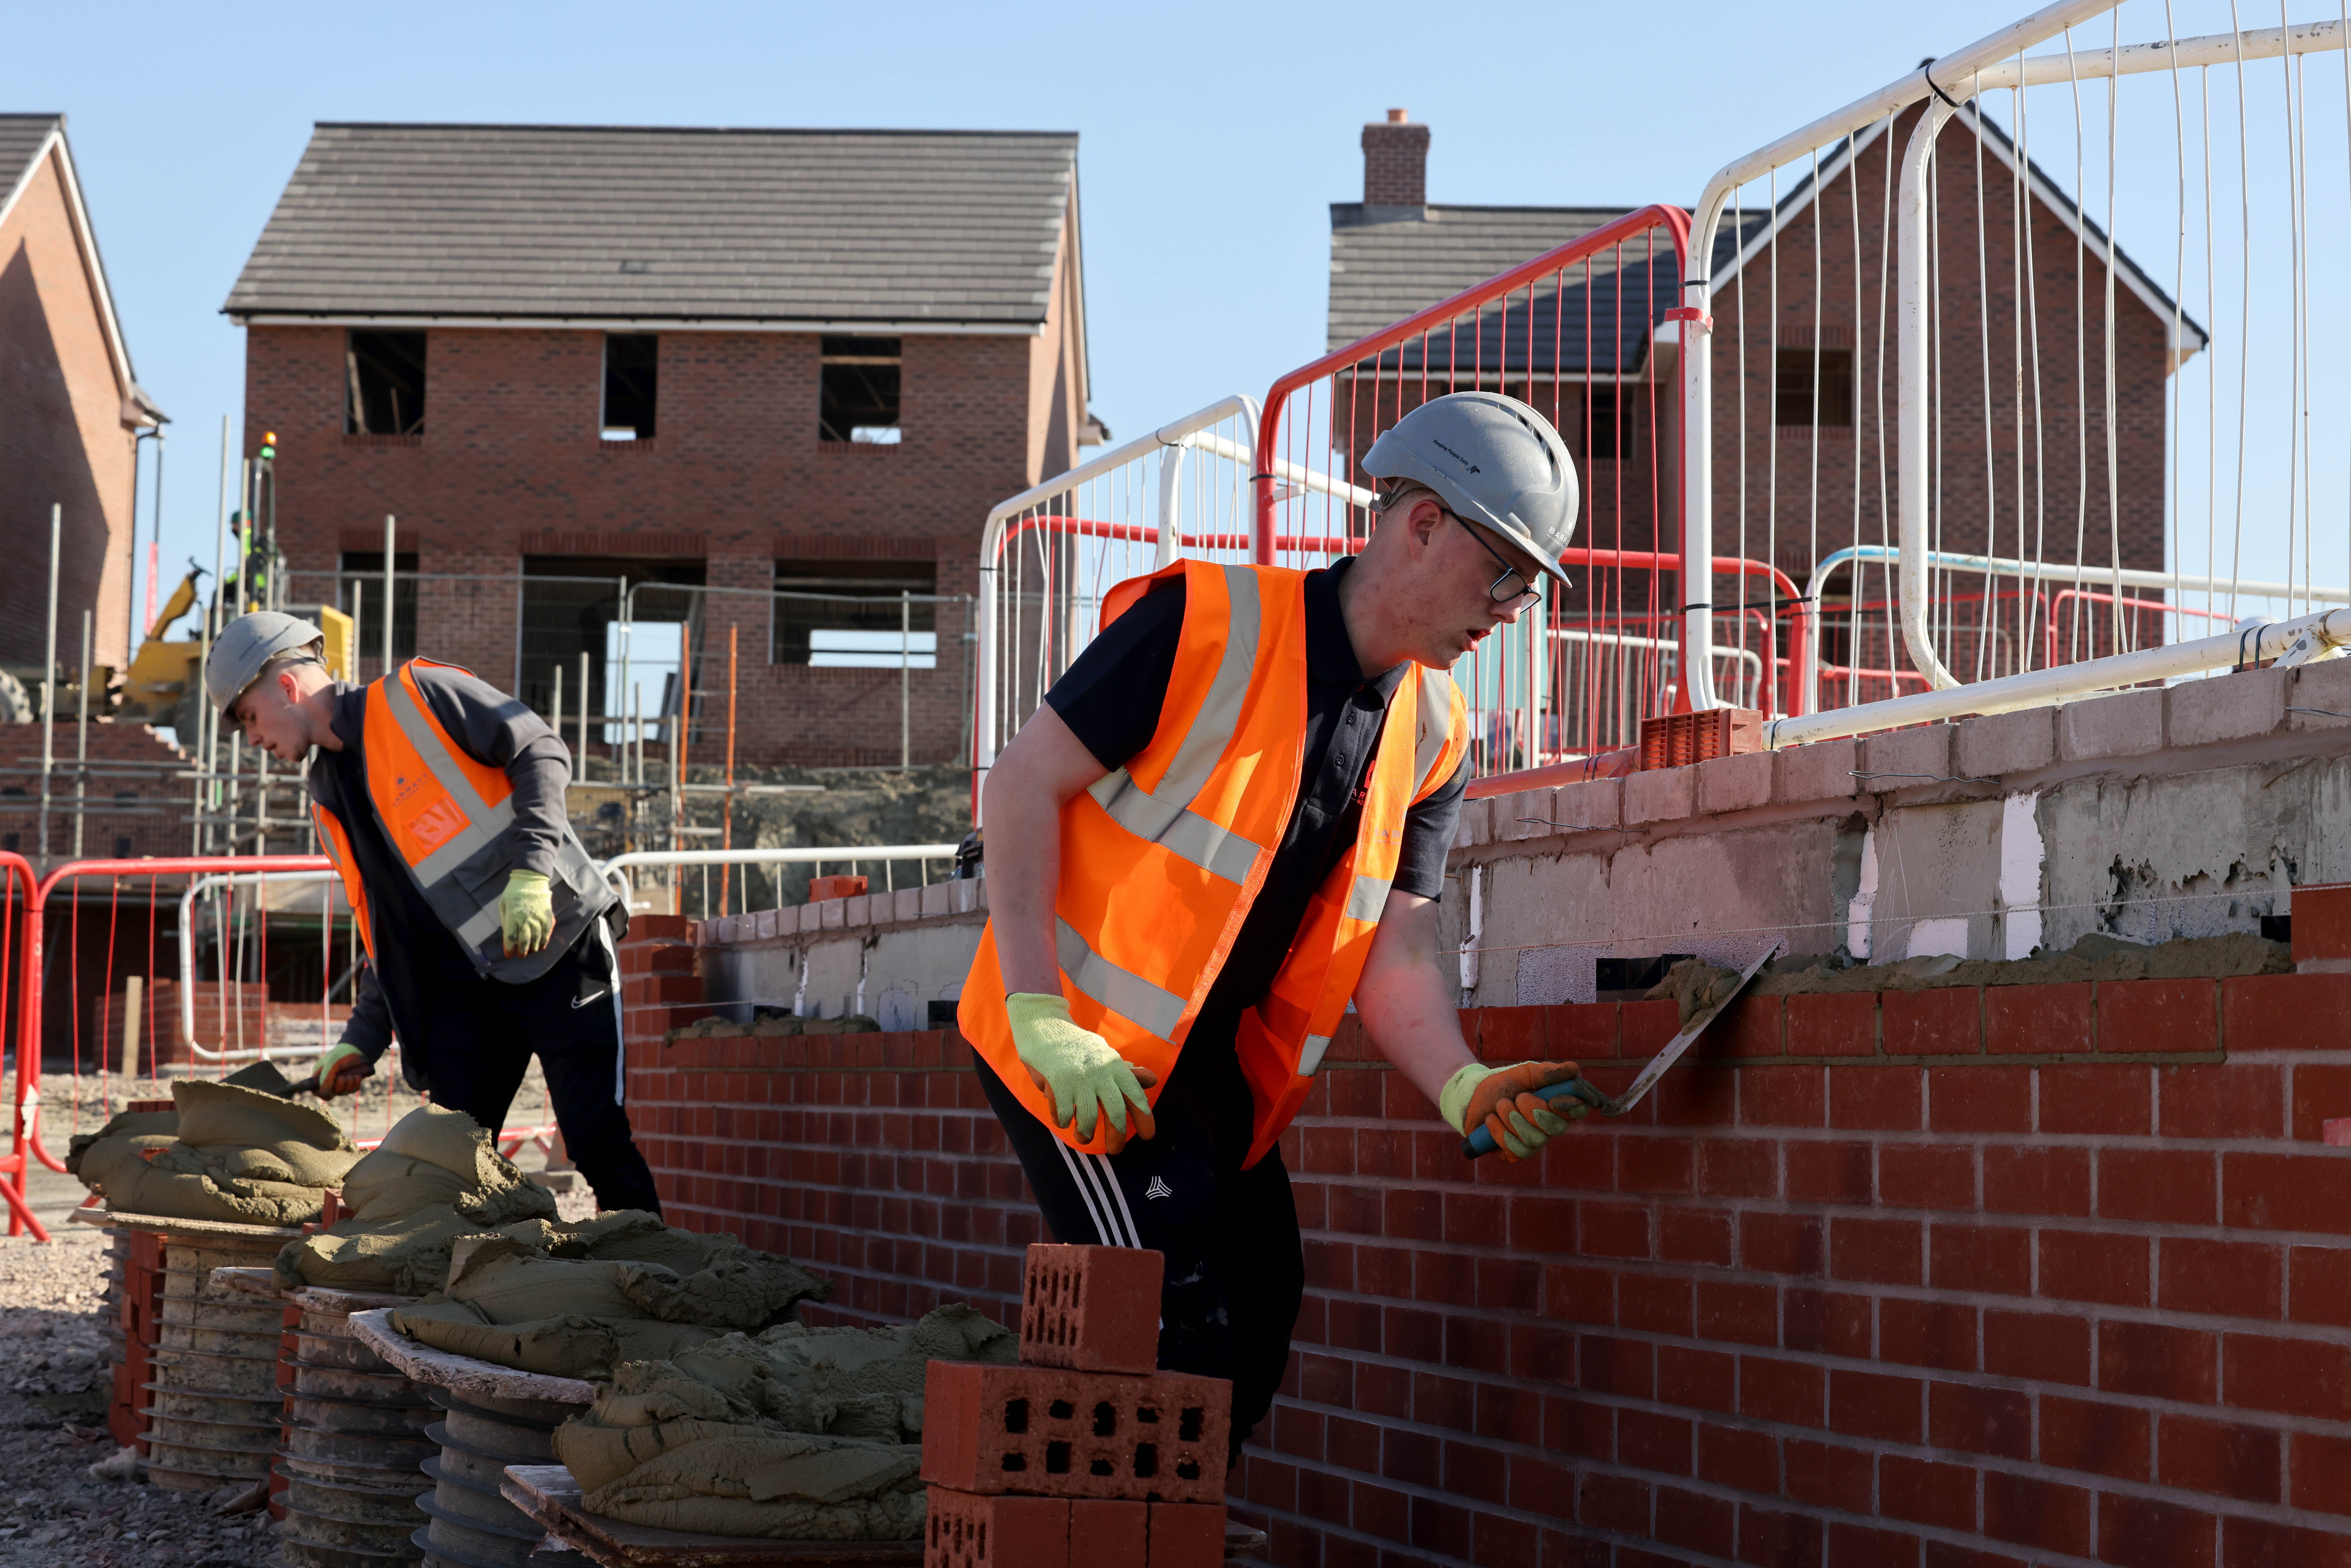 Housebuilding giant Barratt Developments has seen annual profits soar nearly two-thirds higher, but revealed rising build costs and a dip in recent buyer demand following the stamp duty deadline (Jonathan Buckmaster/Daily Express/PA)